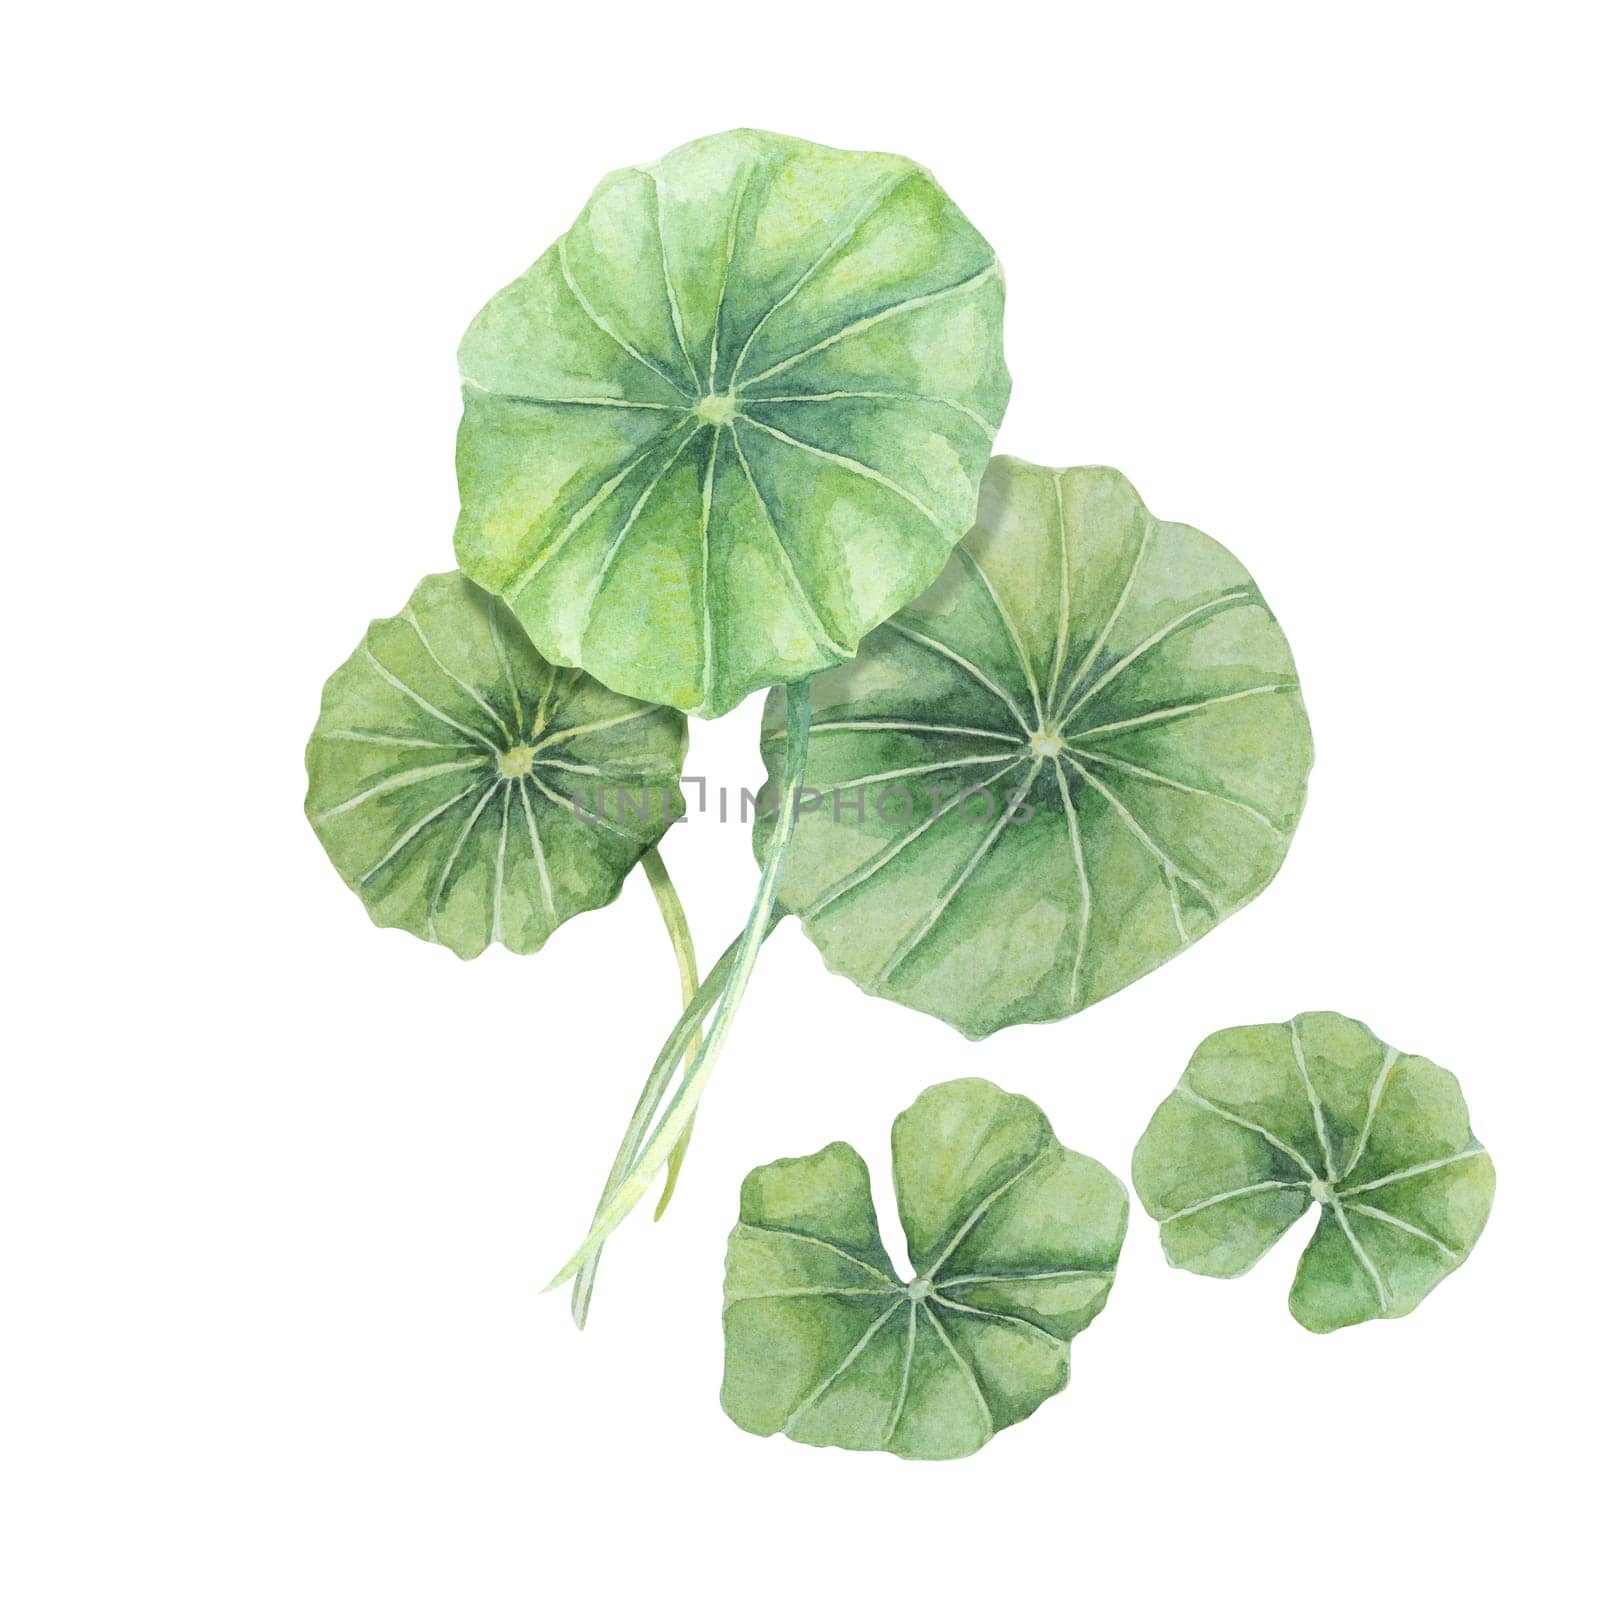 Centella asiatica, gotu cola arrangement. Hand drawn watercolor clipart, Asiatic pennywort for cosmetics, packaging, beauty, labels, supplements by Fofito